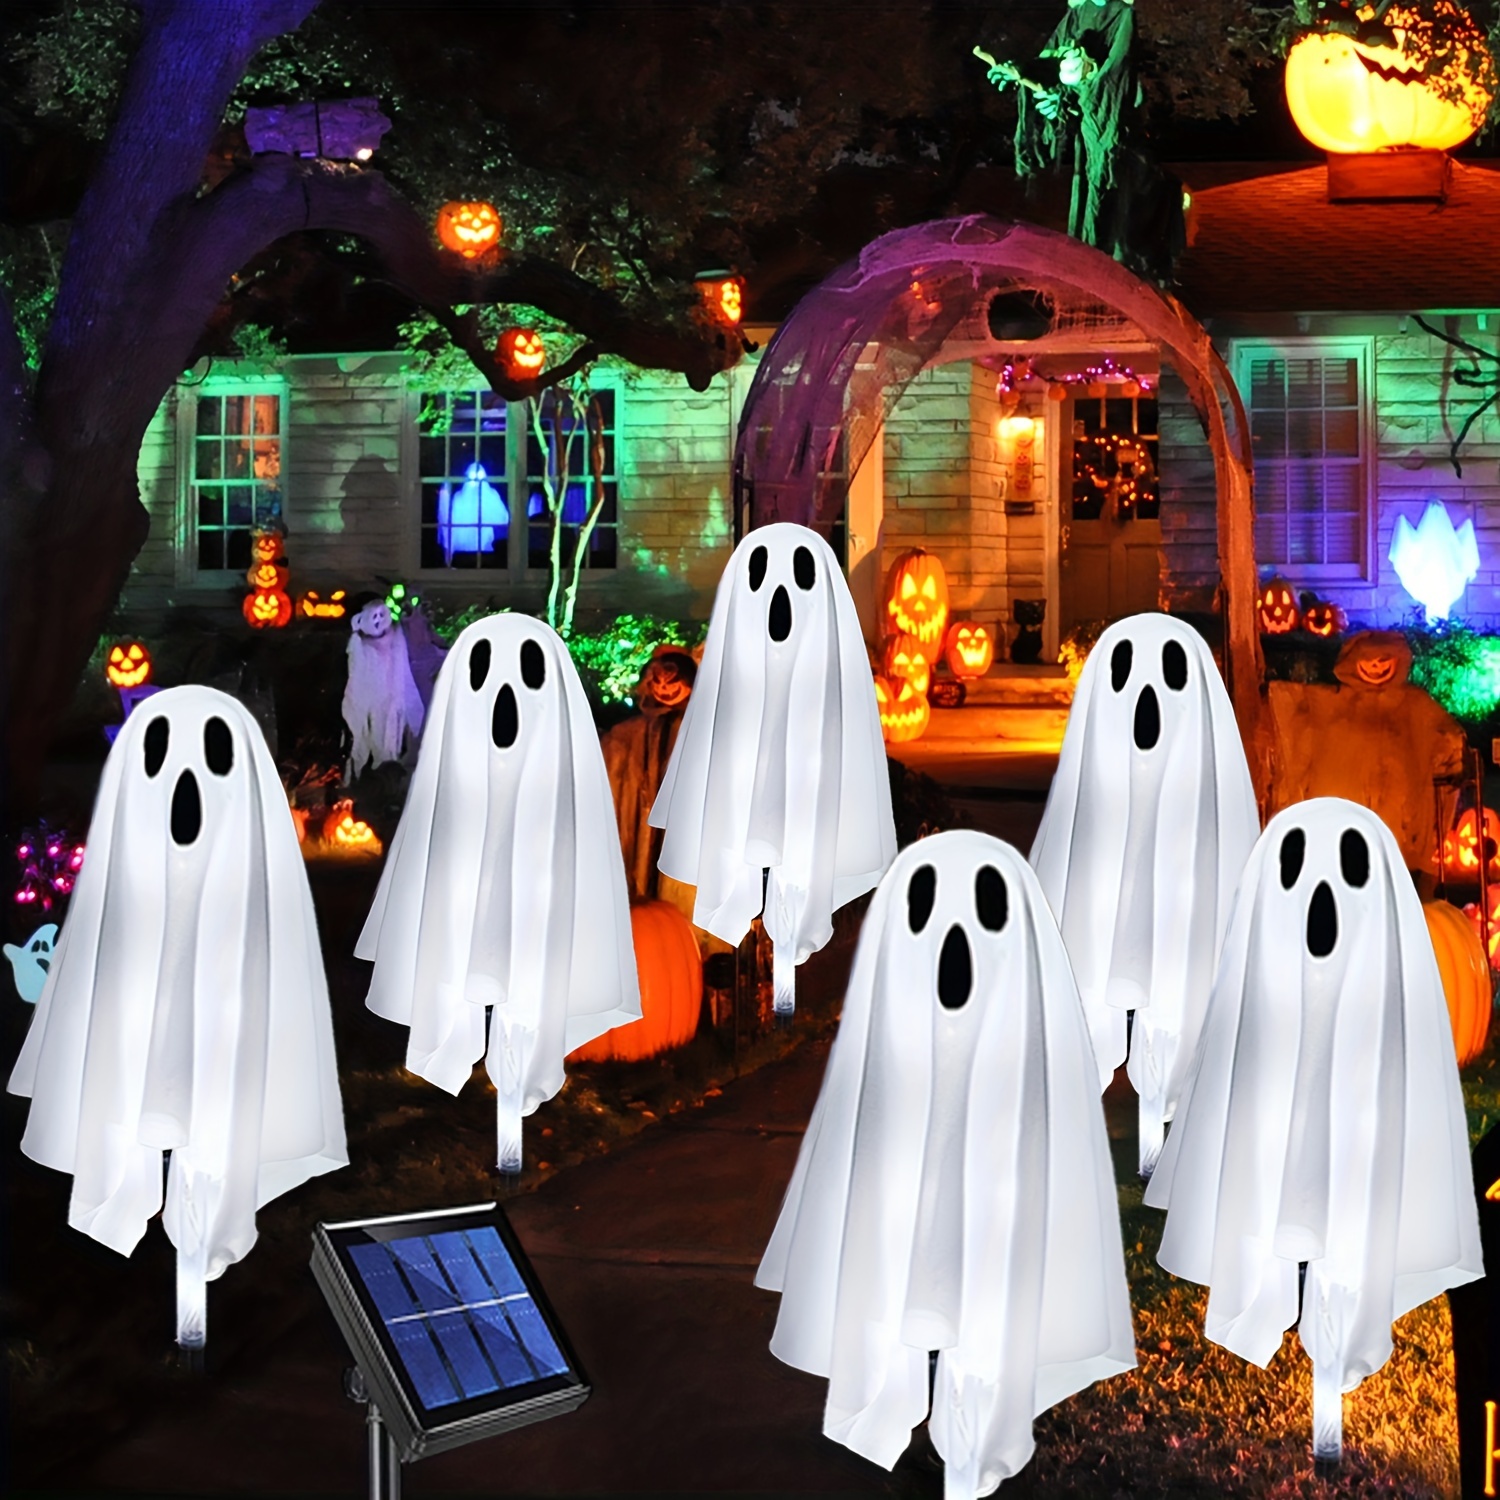 

3-piece Or 6-piece Solar-powered Light-up Halloween Ghost Yard Stakes - Spooky White Specter Design For Garden, Lawn & Walkway